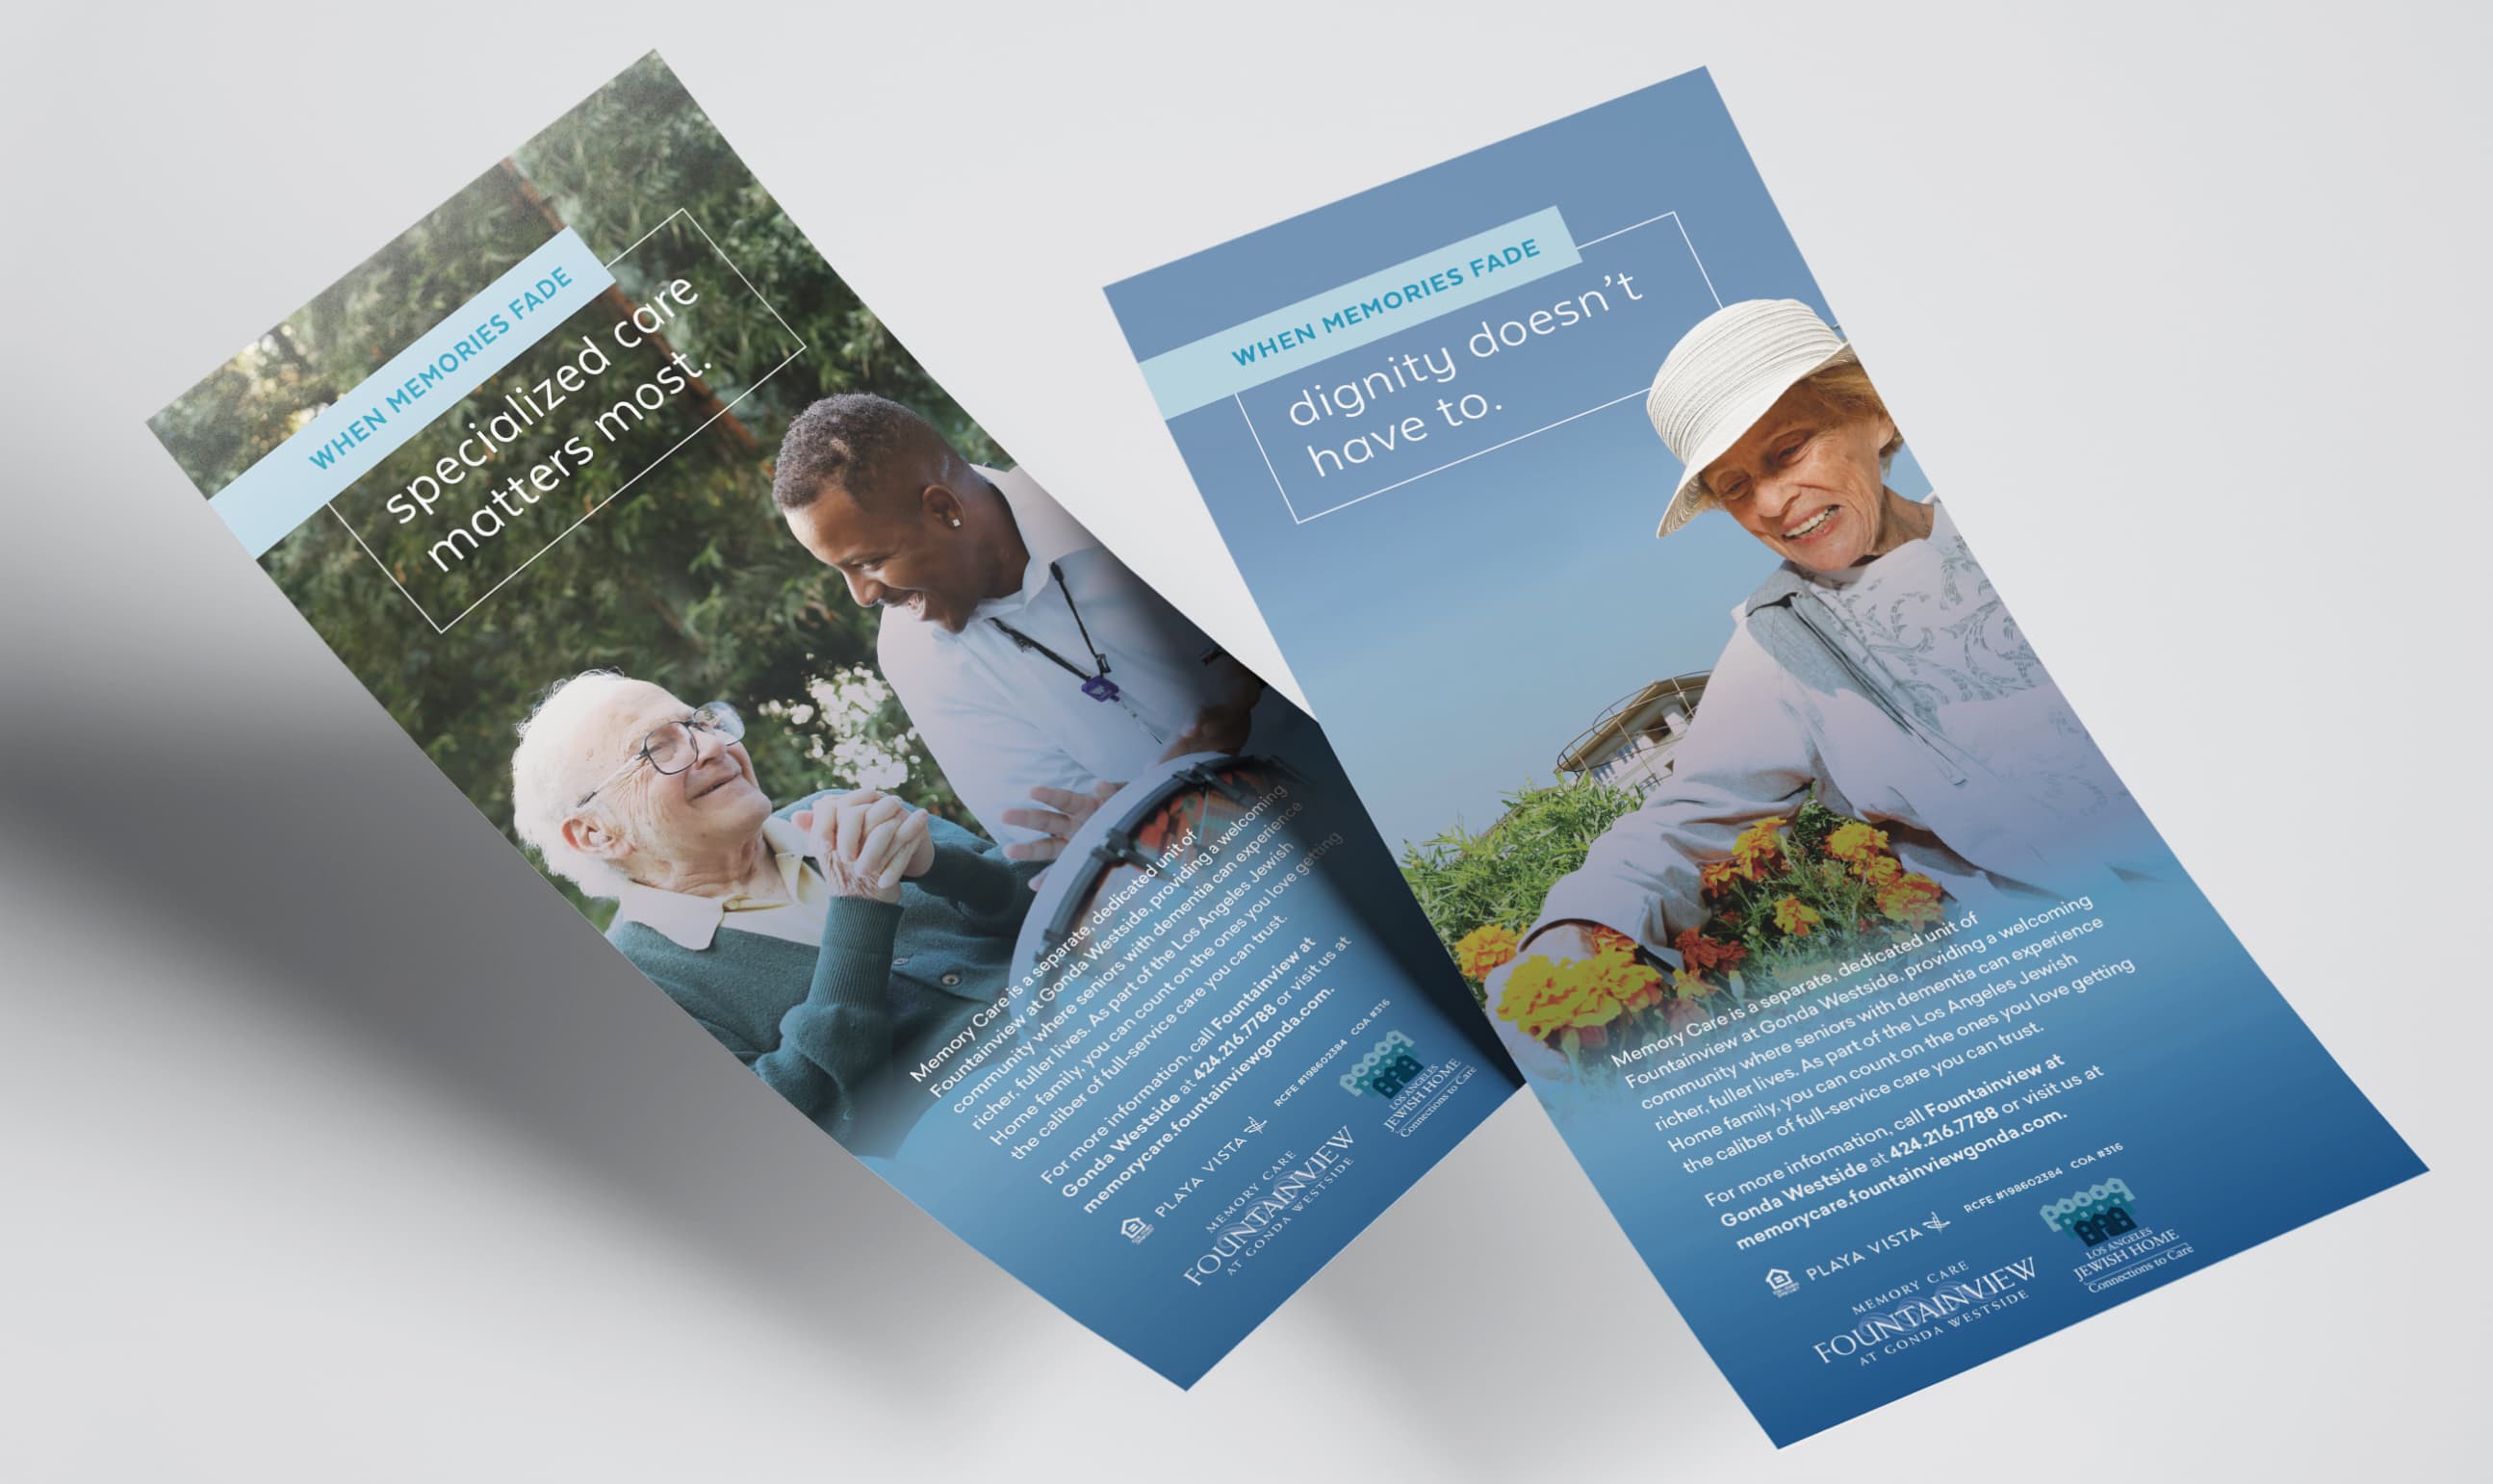 Two vertical brochures titled 'WHEN MEMORIES FADE,' one depicting a caring moment between a healthcare worker and an elderly man, and the other showing an elderly woman smiling with a garden in the background, both emphasizing dignified care.